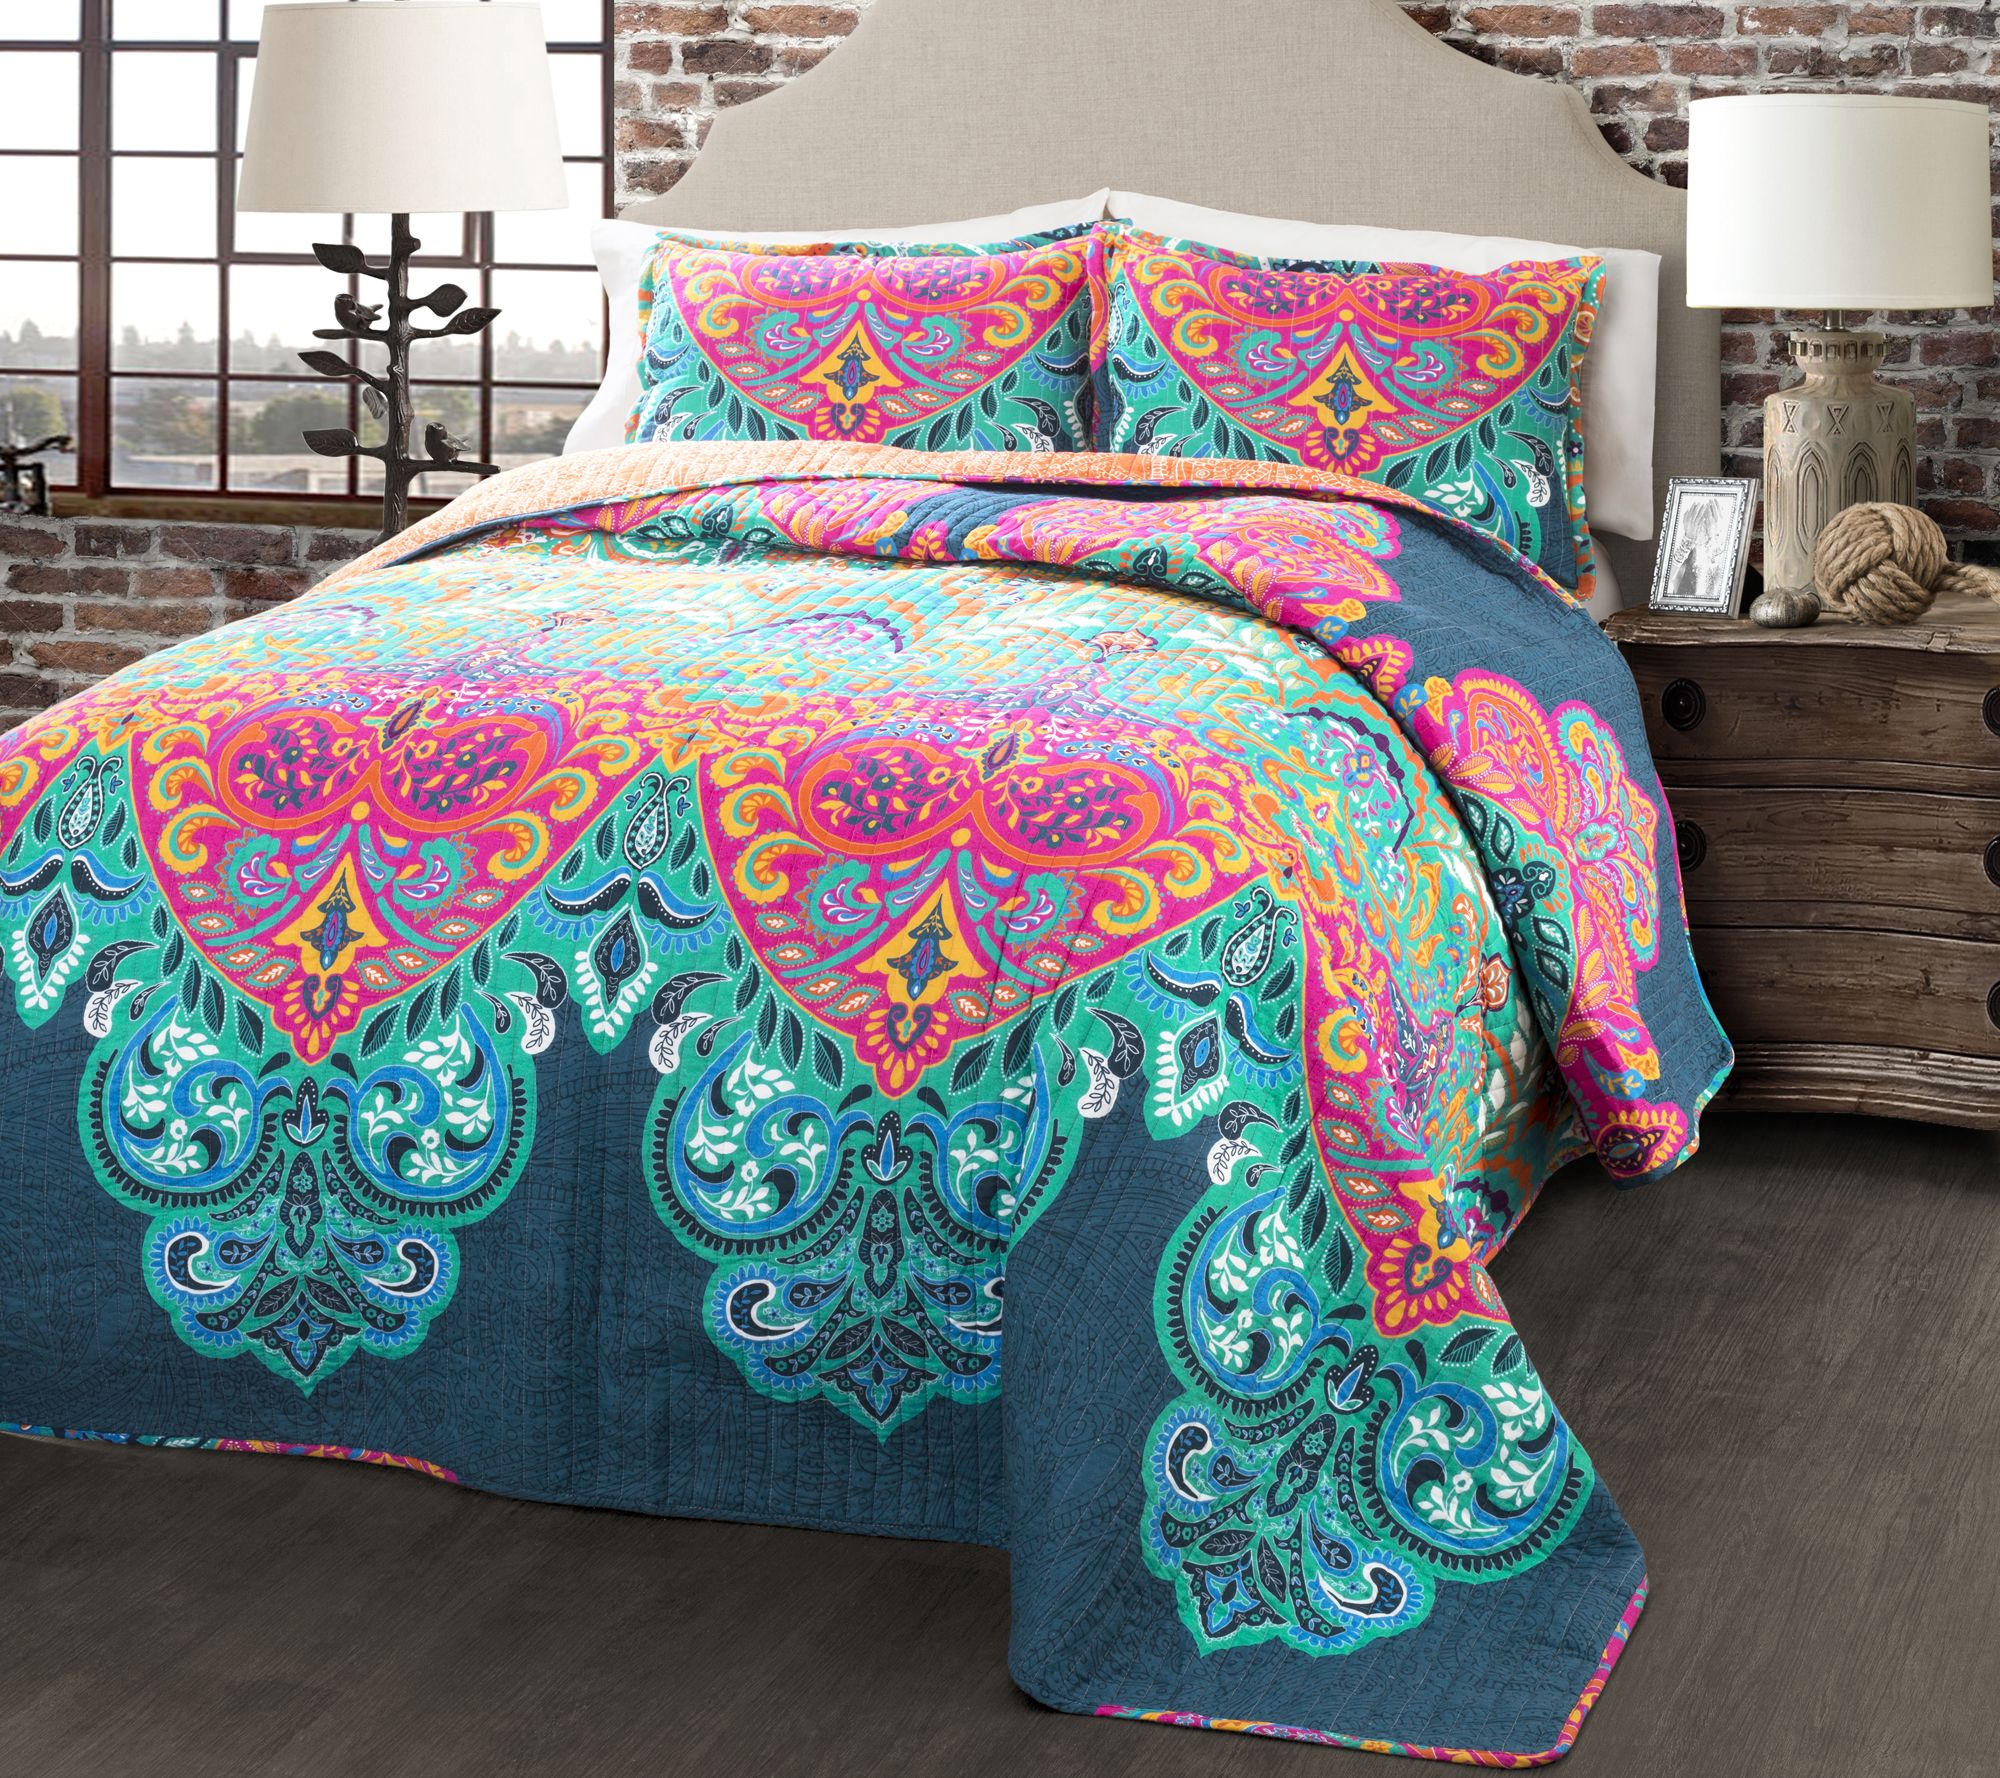 Pink Boho Quilt with 2 Pillow Shams YMY Quilt Sets Queen 3 Piece Bohemian Queen Quilt Bedding Set 90 X 96 inches 